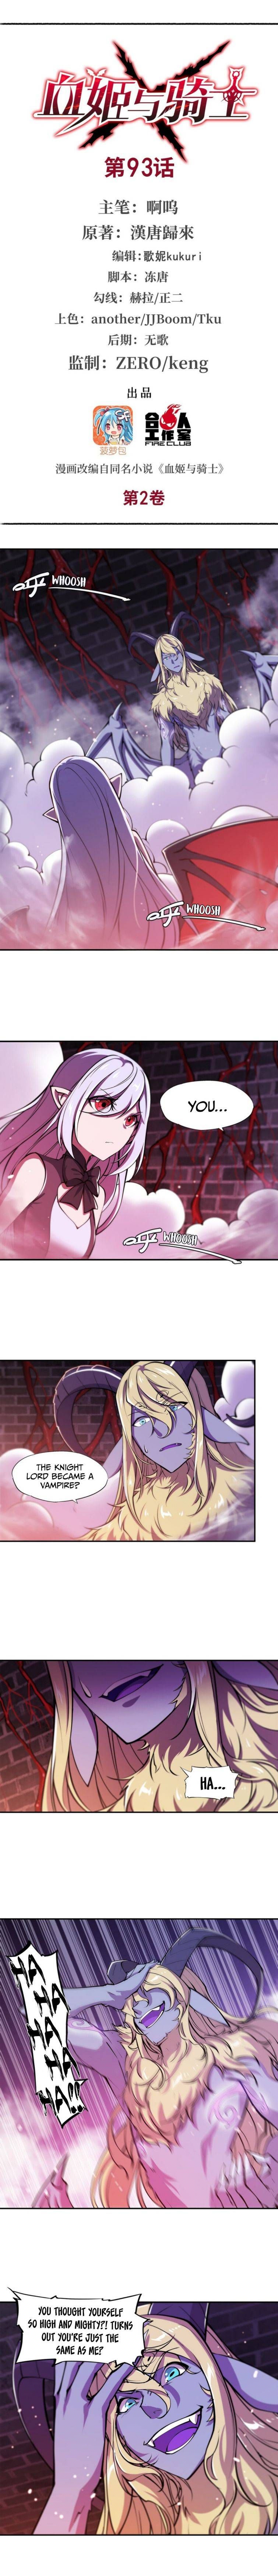 The Blood Princess and the Knight Chapter 93 page 2